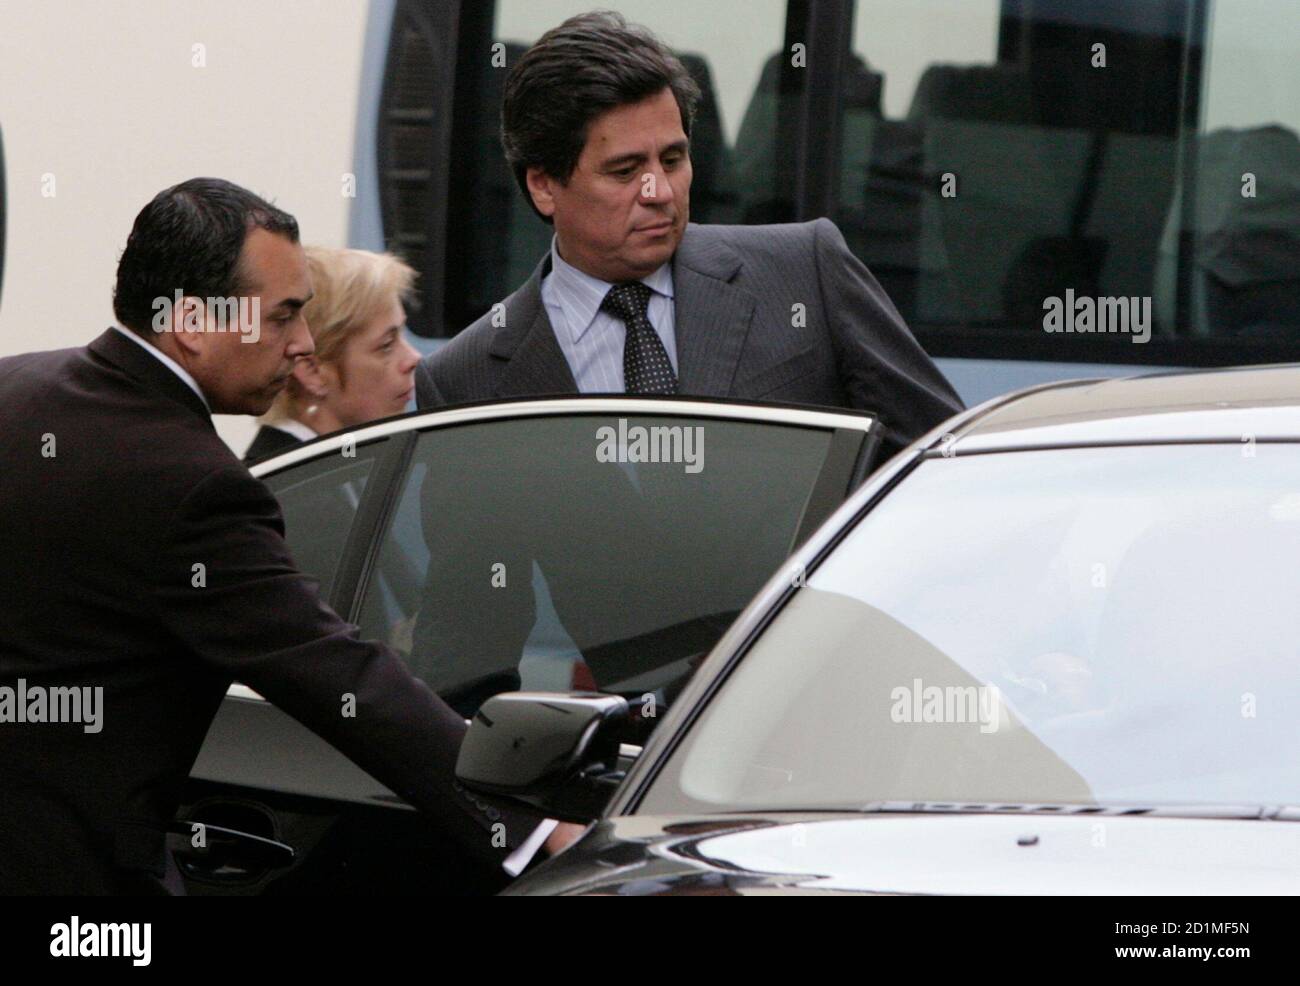 Chile's adviser to his embassy in Peru, Andres Barbe (R), leaves the Peruvian Foreign Ministry after receiving documents in Lima, November 18, 2009. Barbe received document related to a Peruvian military officer that has spied for Chile.  REUTERS/Mariana Bazo (PERU POLITICS) Stock Photo